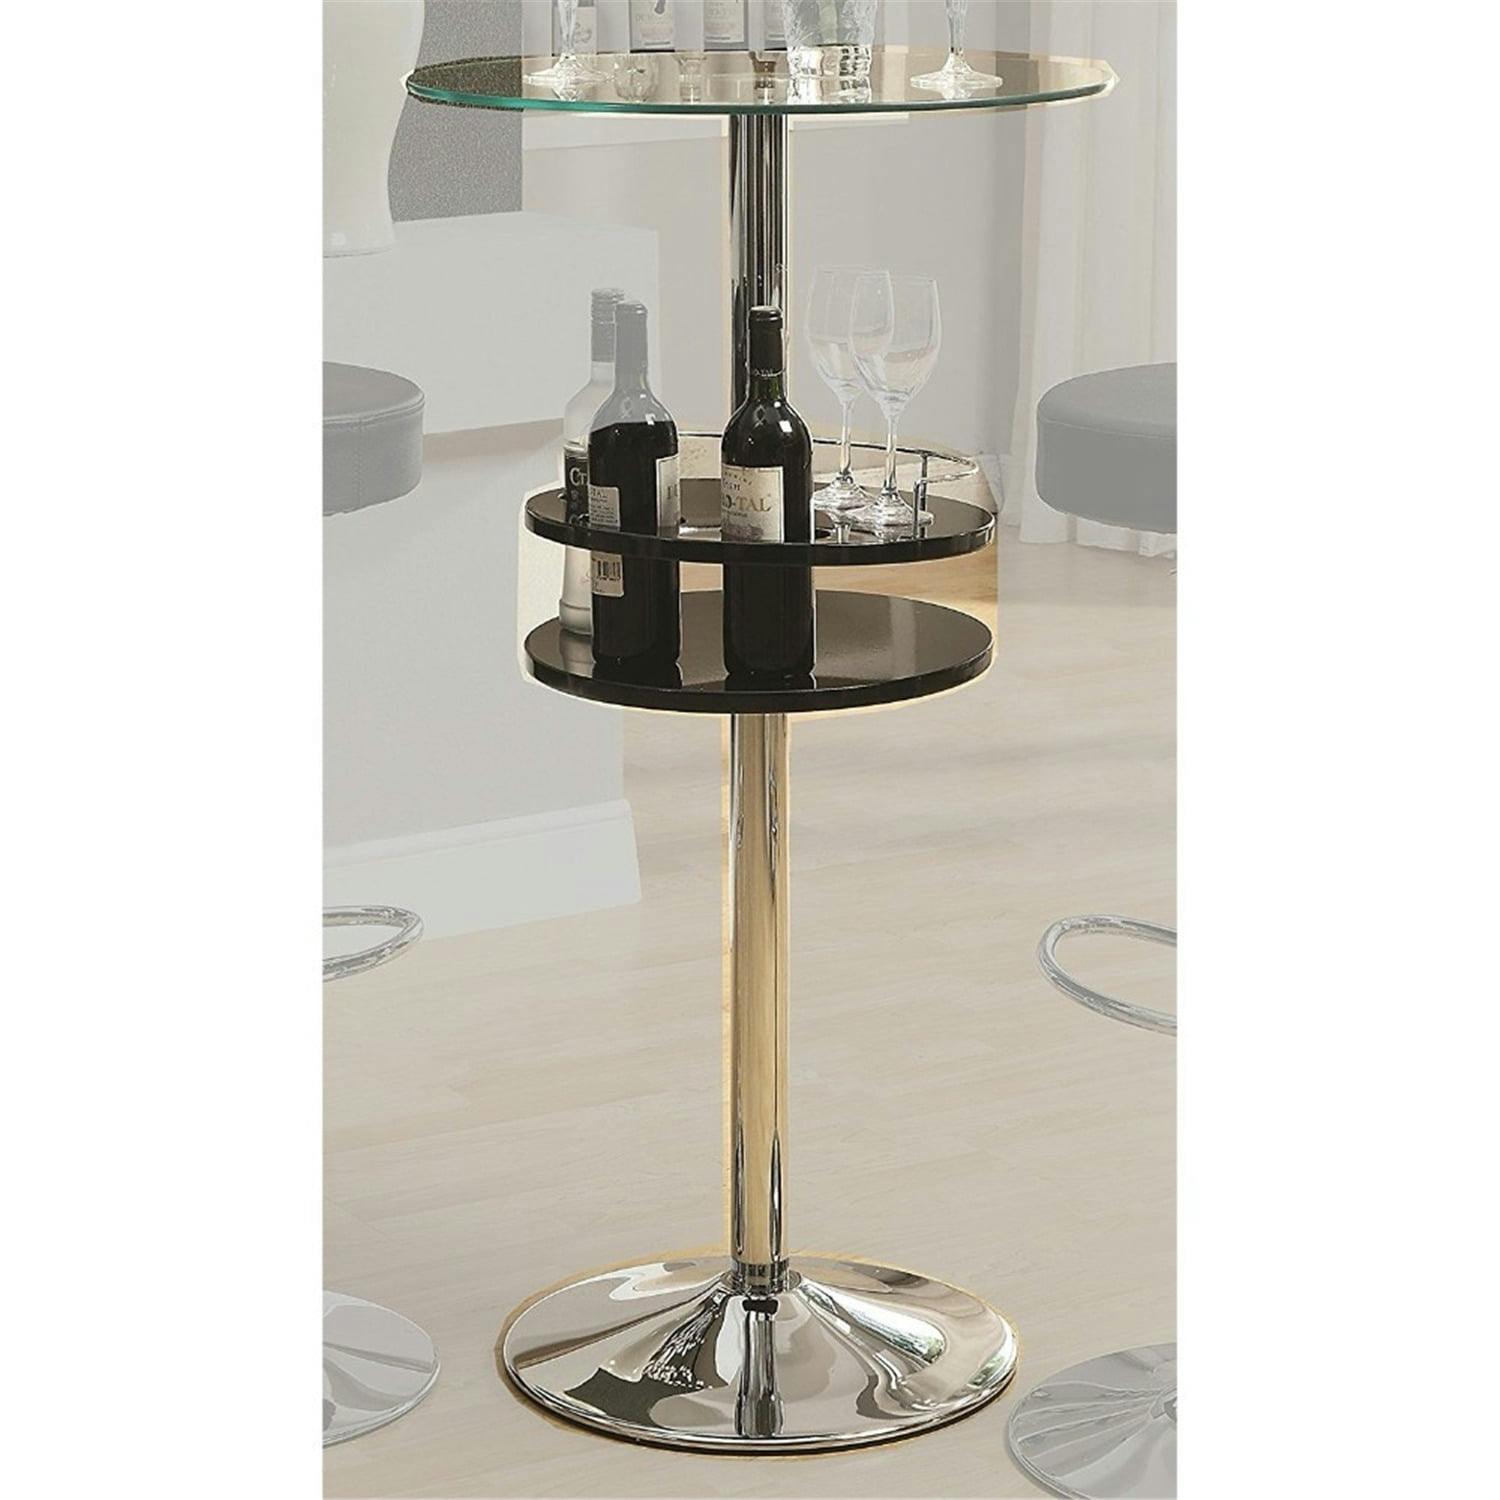 Contemporary Chrome Polished Round Bar Table with Glass Top and Storage